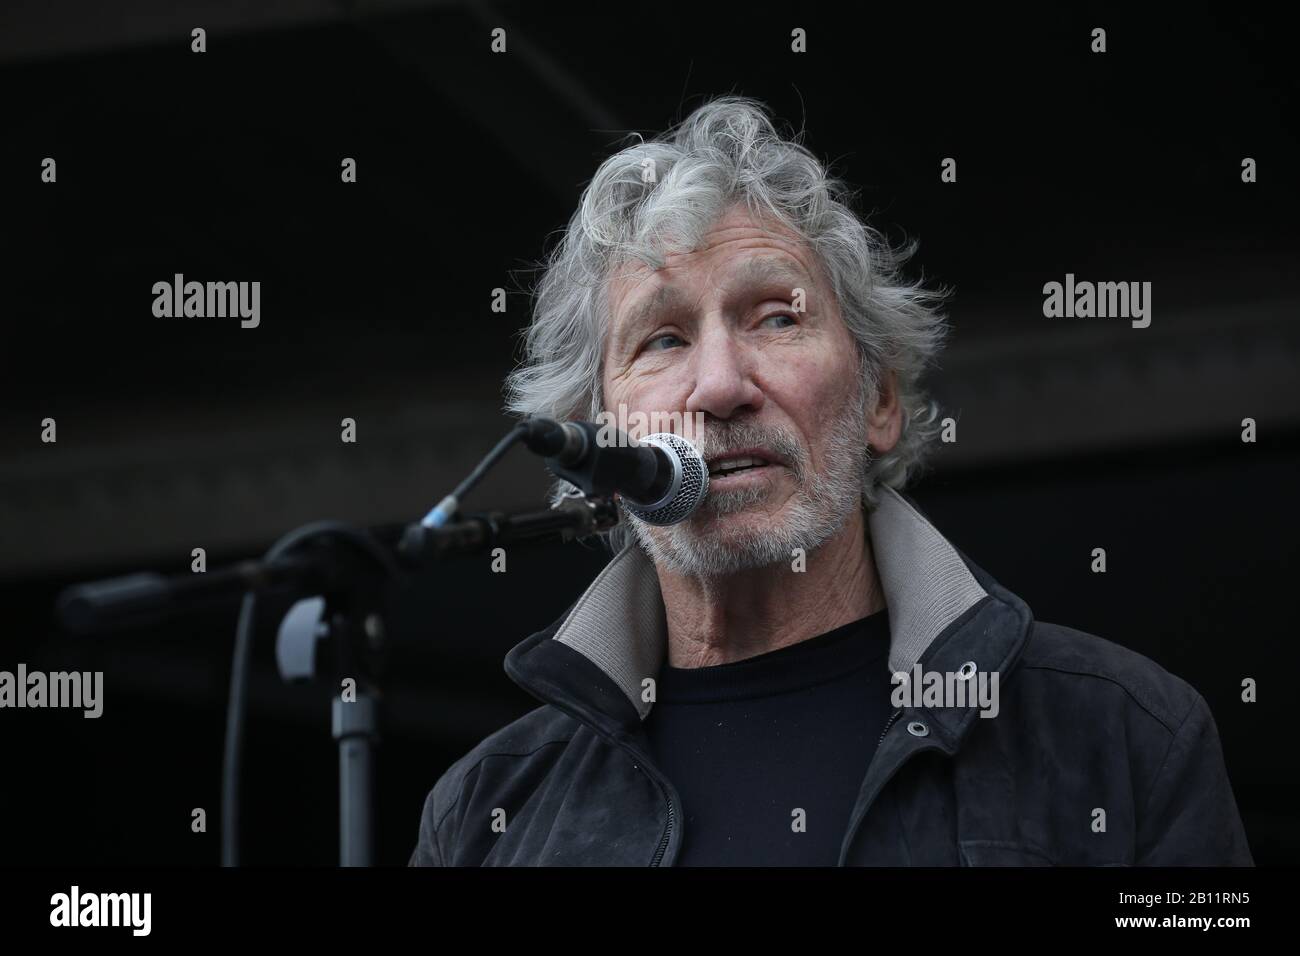 Pink Floyd bassist Roger Waters speaks to crowds gathered in Parliament Square in Westminster, London, protesting Julian Assange's imprisonment and extradition. Stock Photo